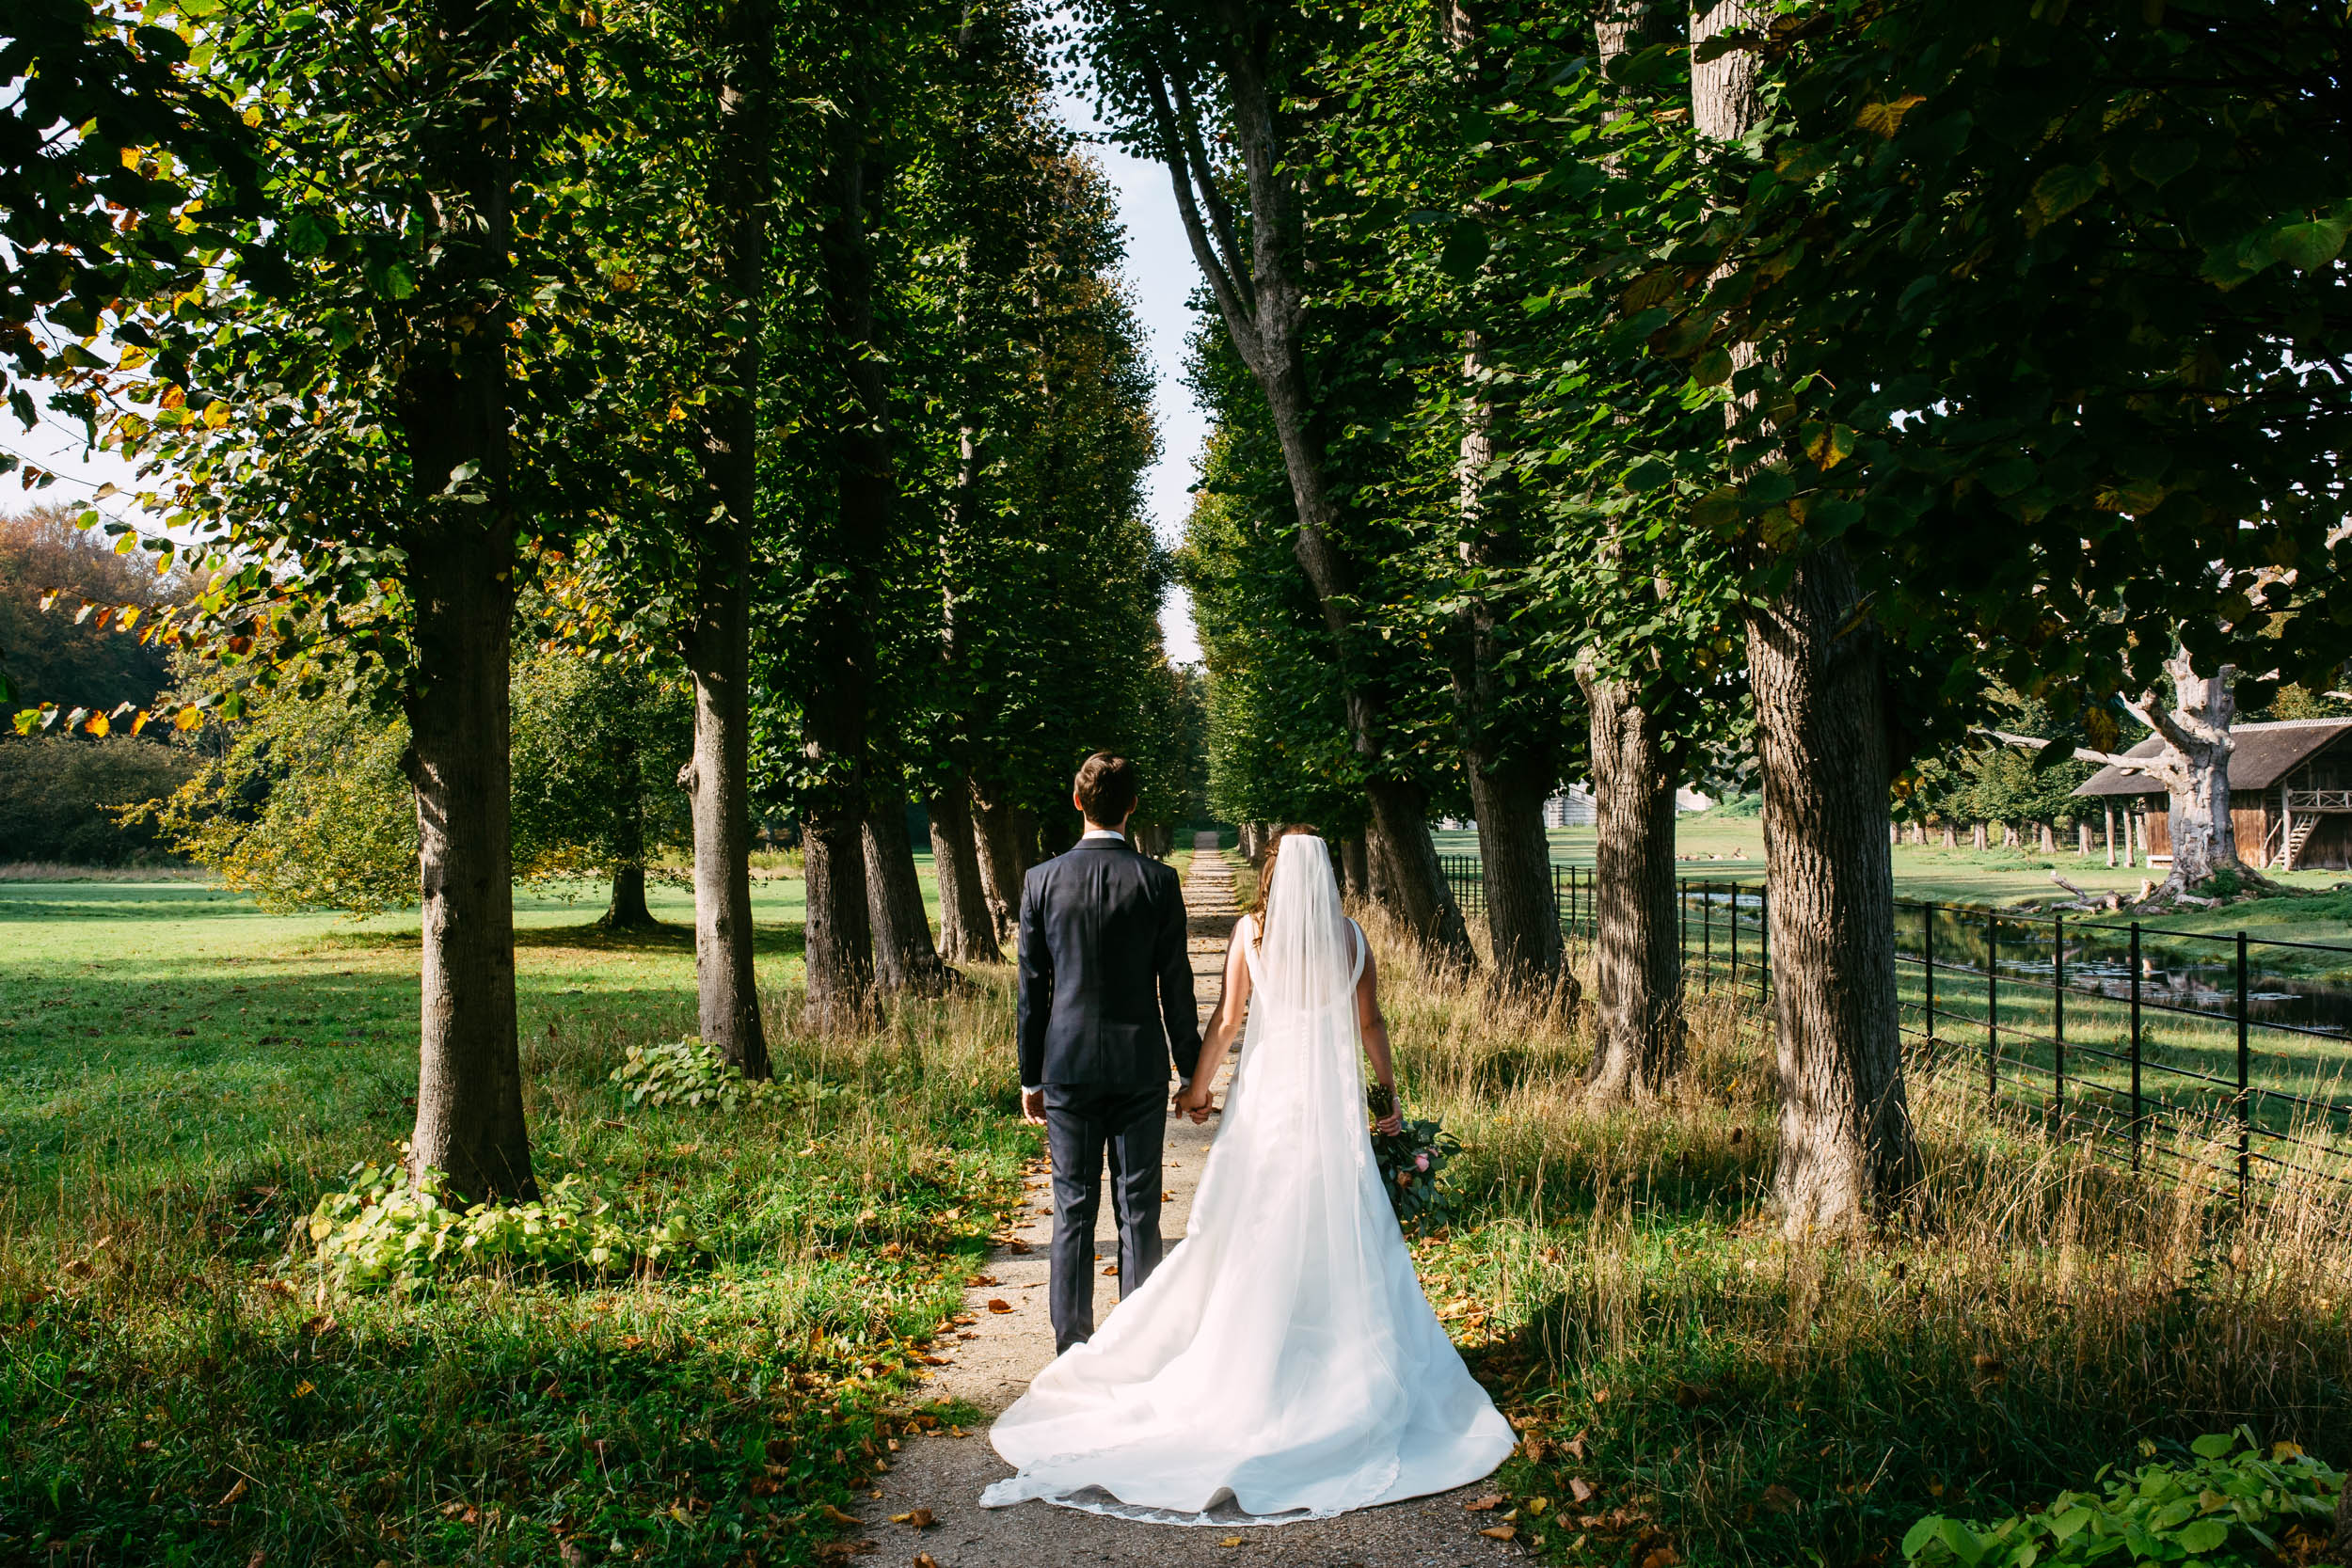 A bride and groom walk along a path lined with trees.